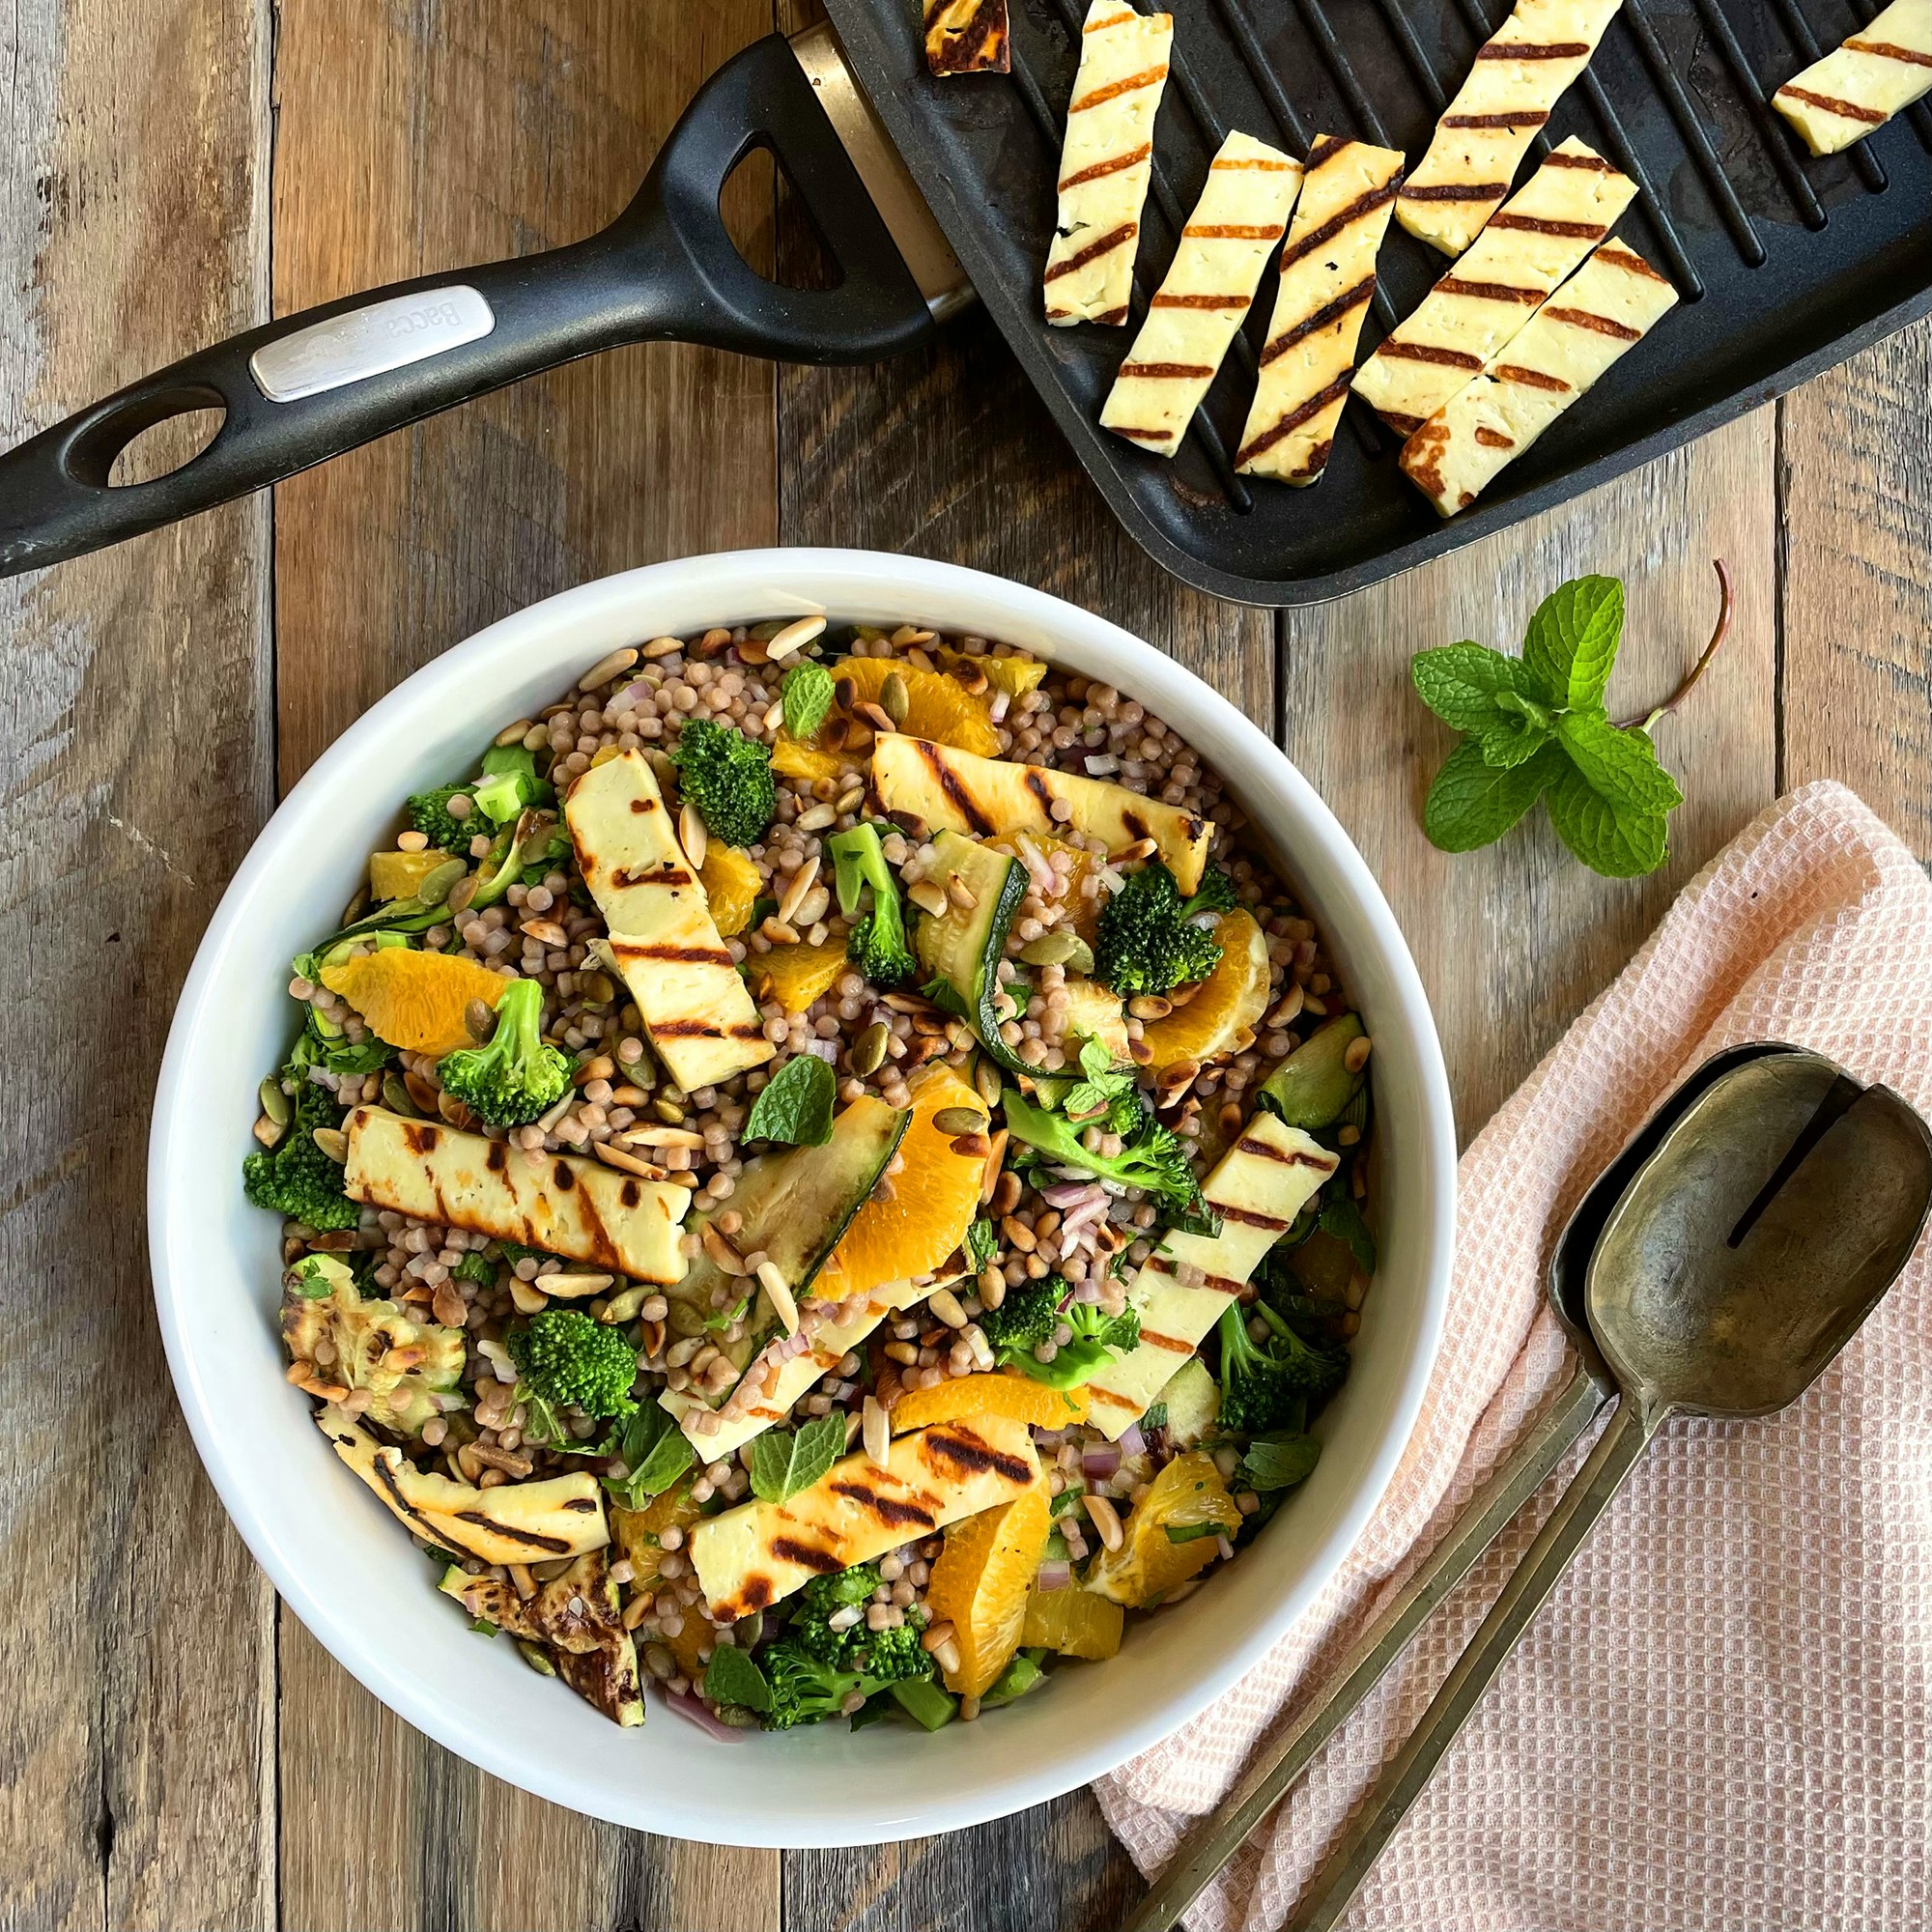 Peral Cous Cous Salad with Zucchini, Orange, Mint and Halloumi Recipe